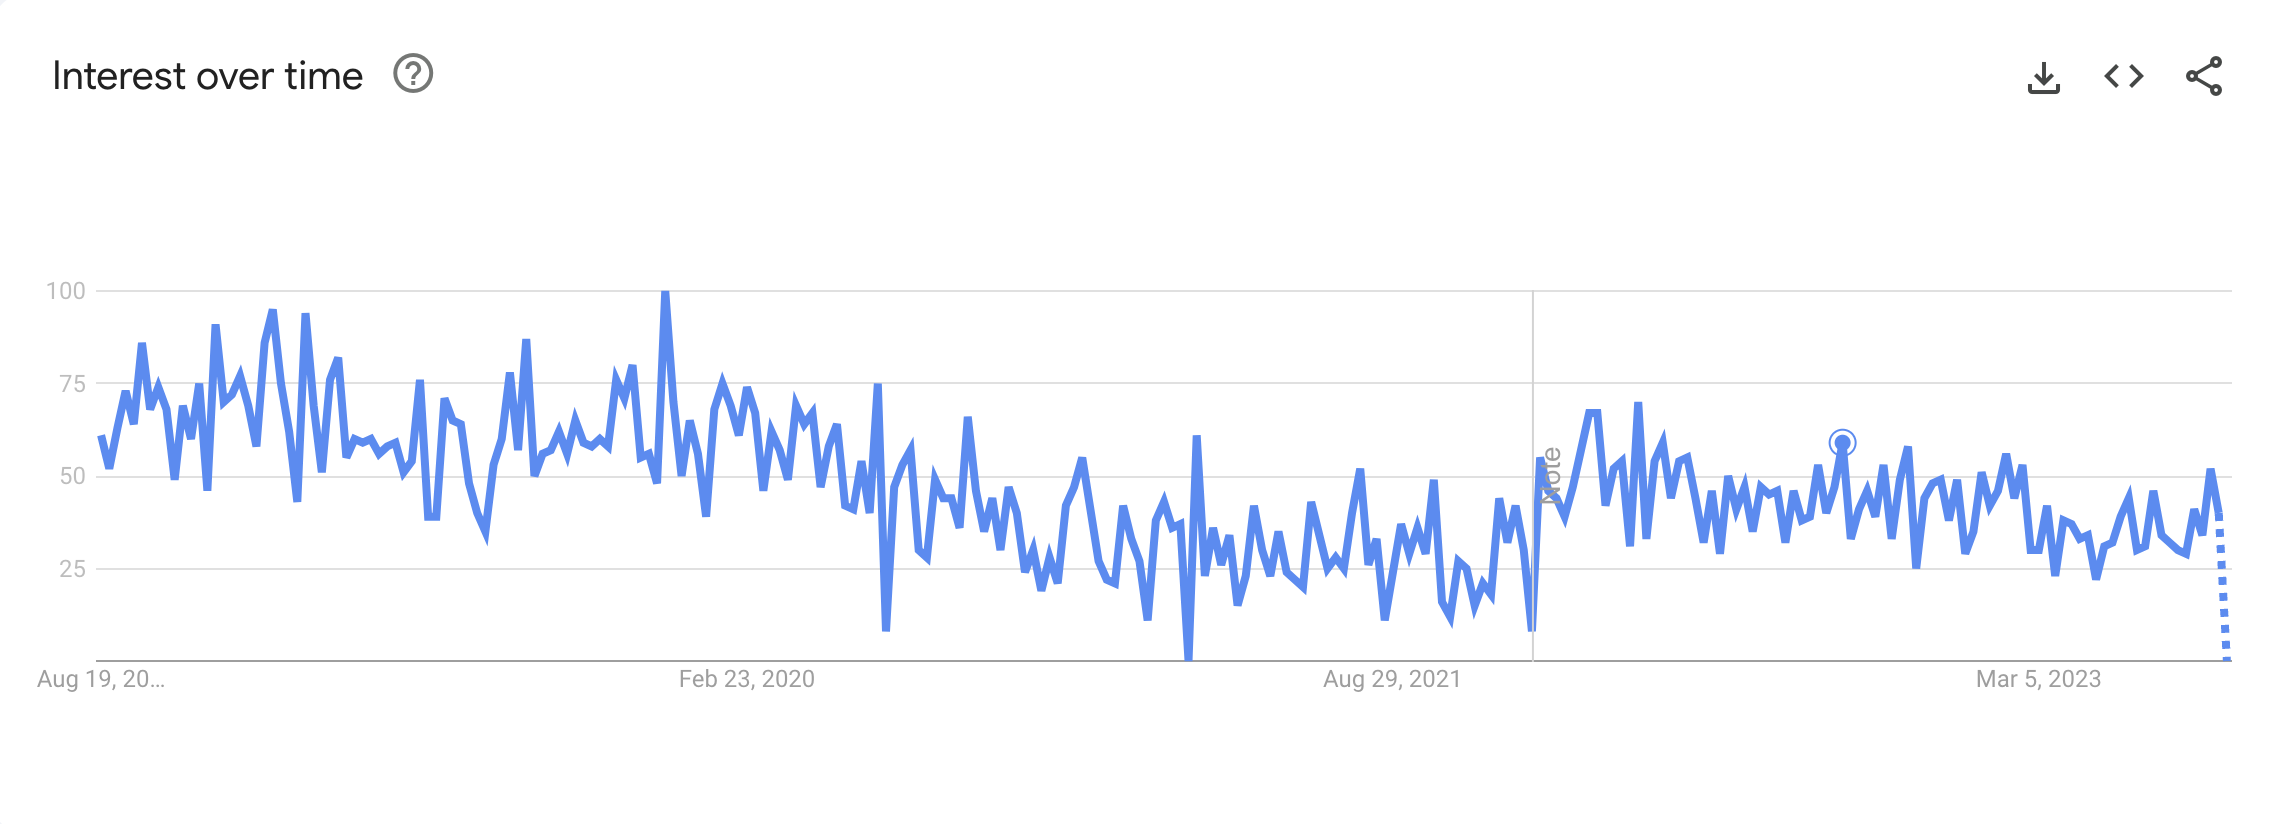 Interest over time